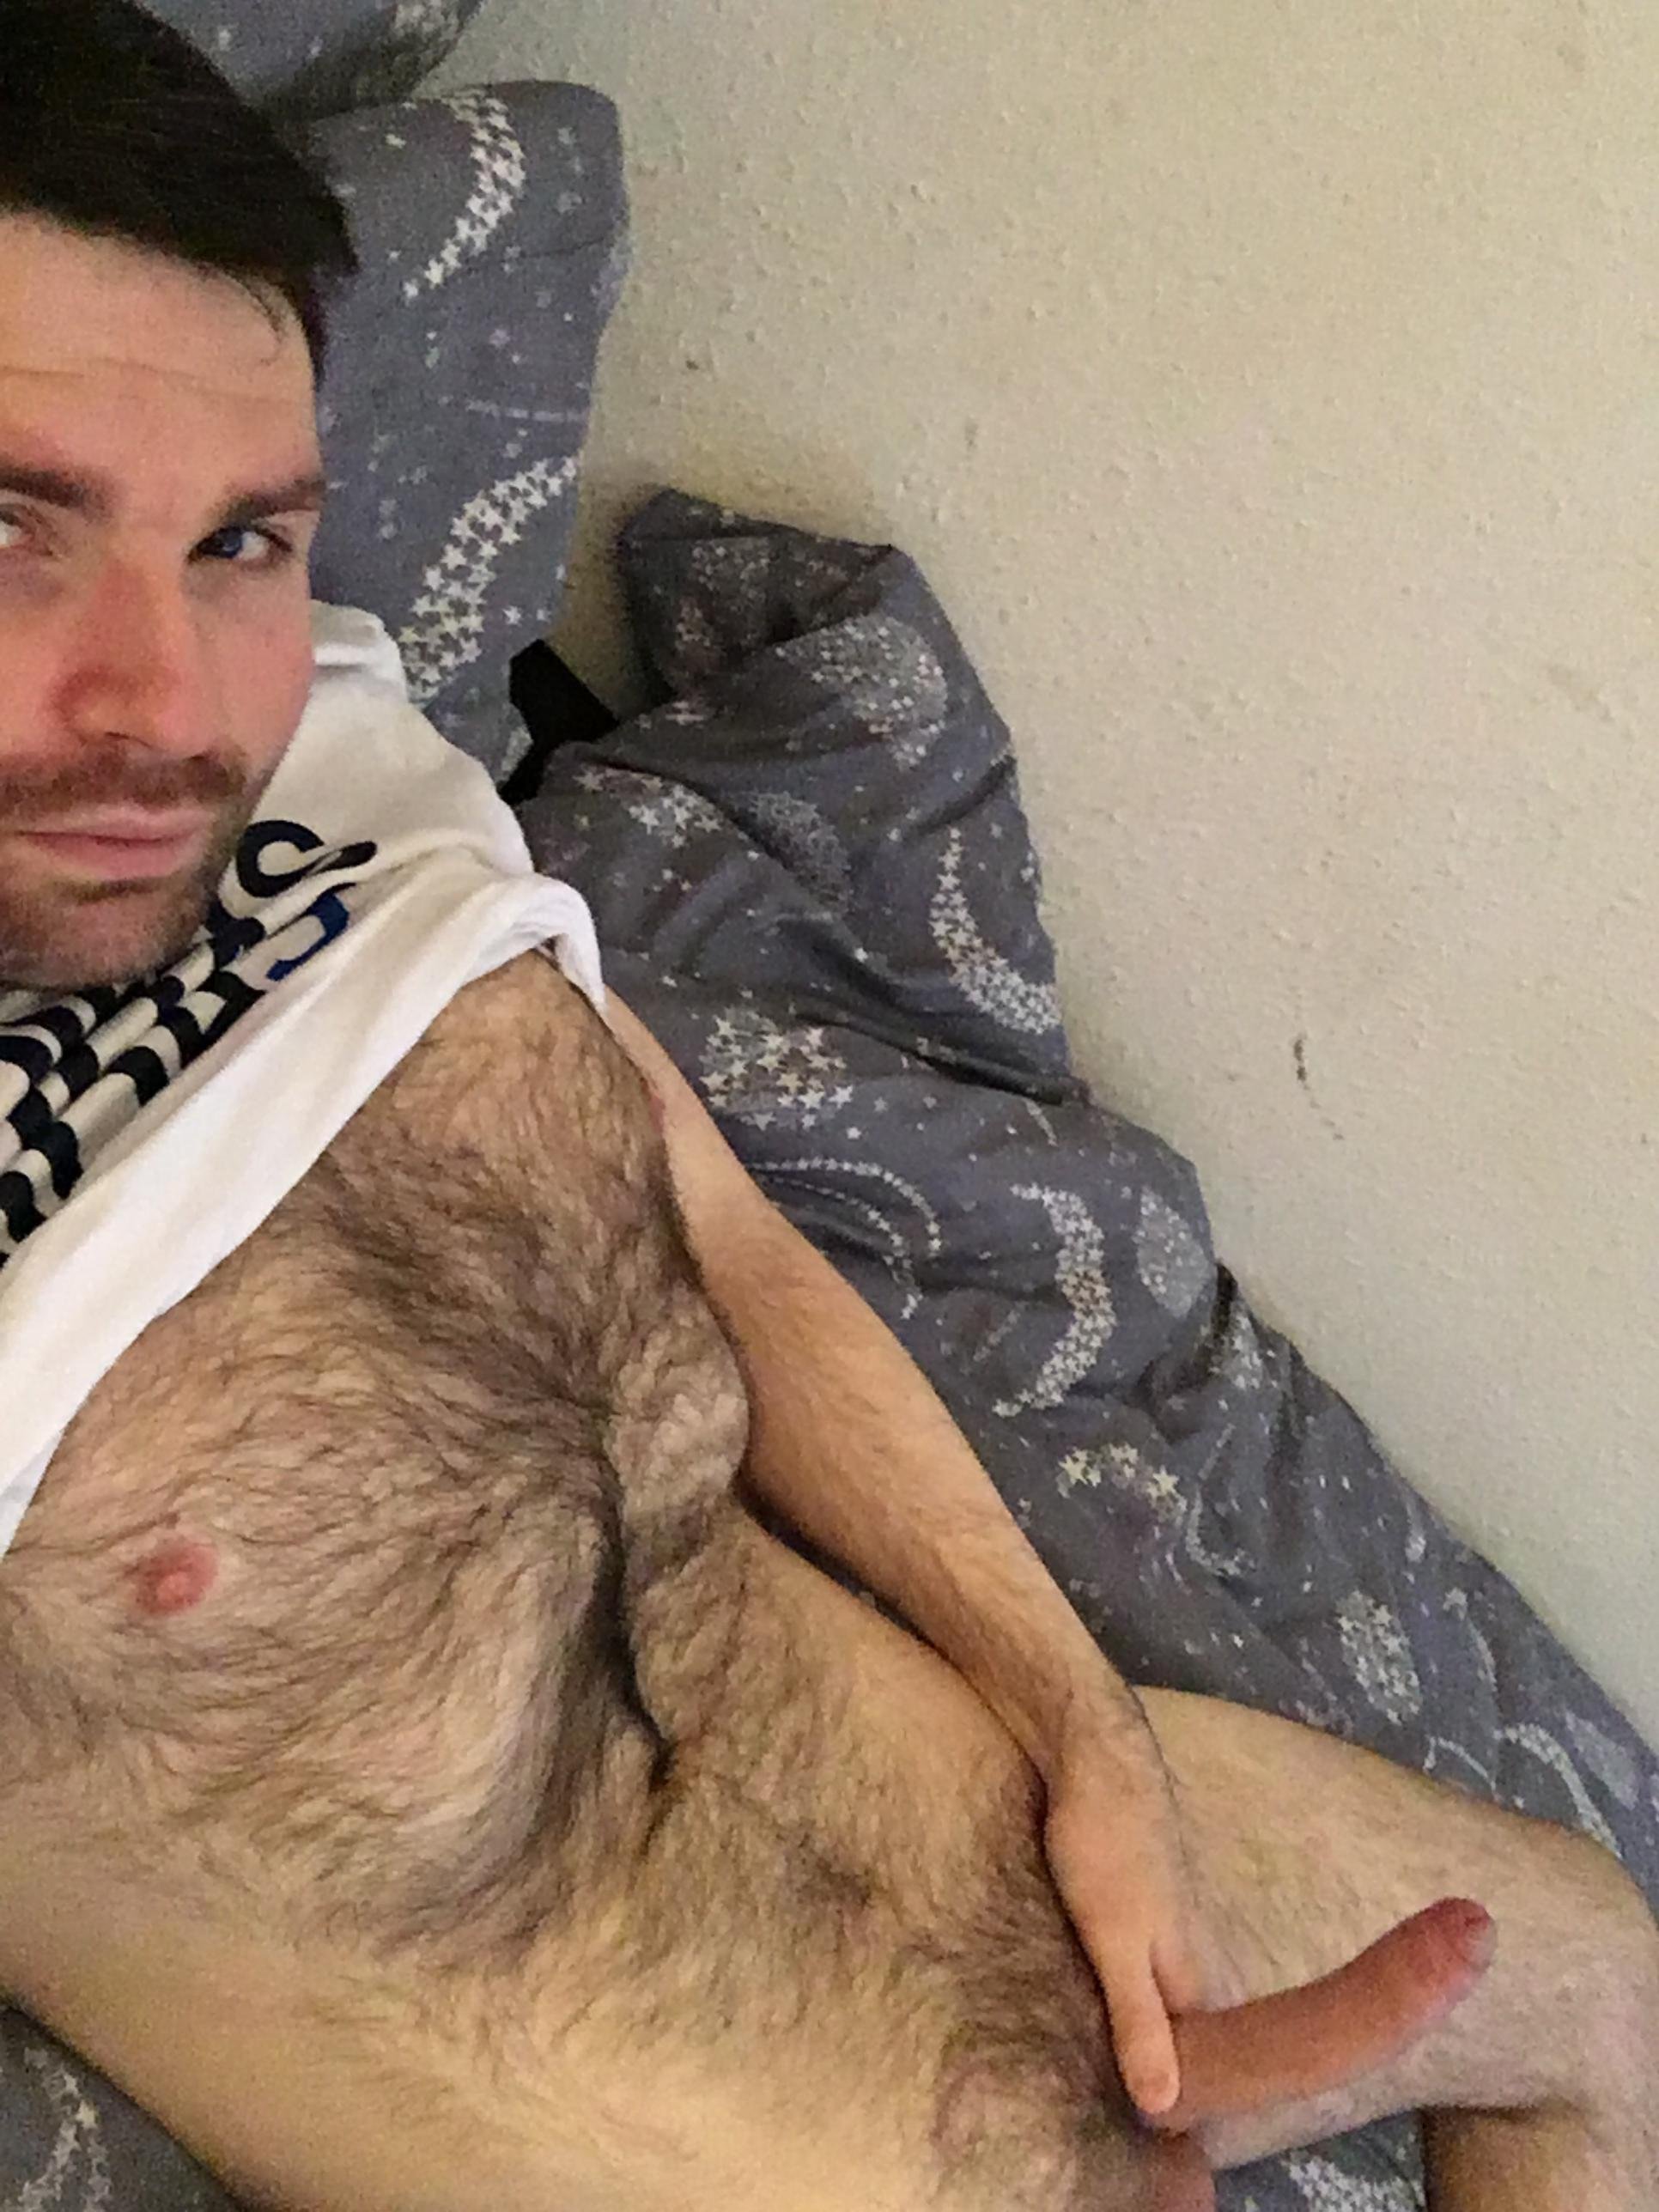 Thoughts on my hairy exposed Scottish body?